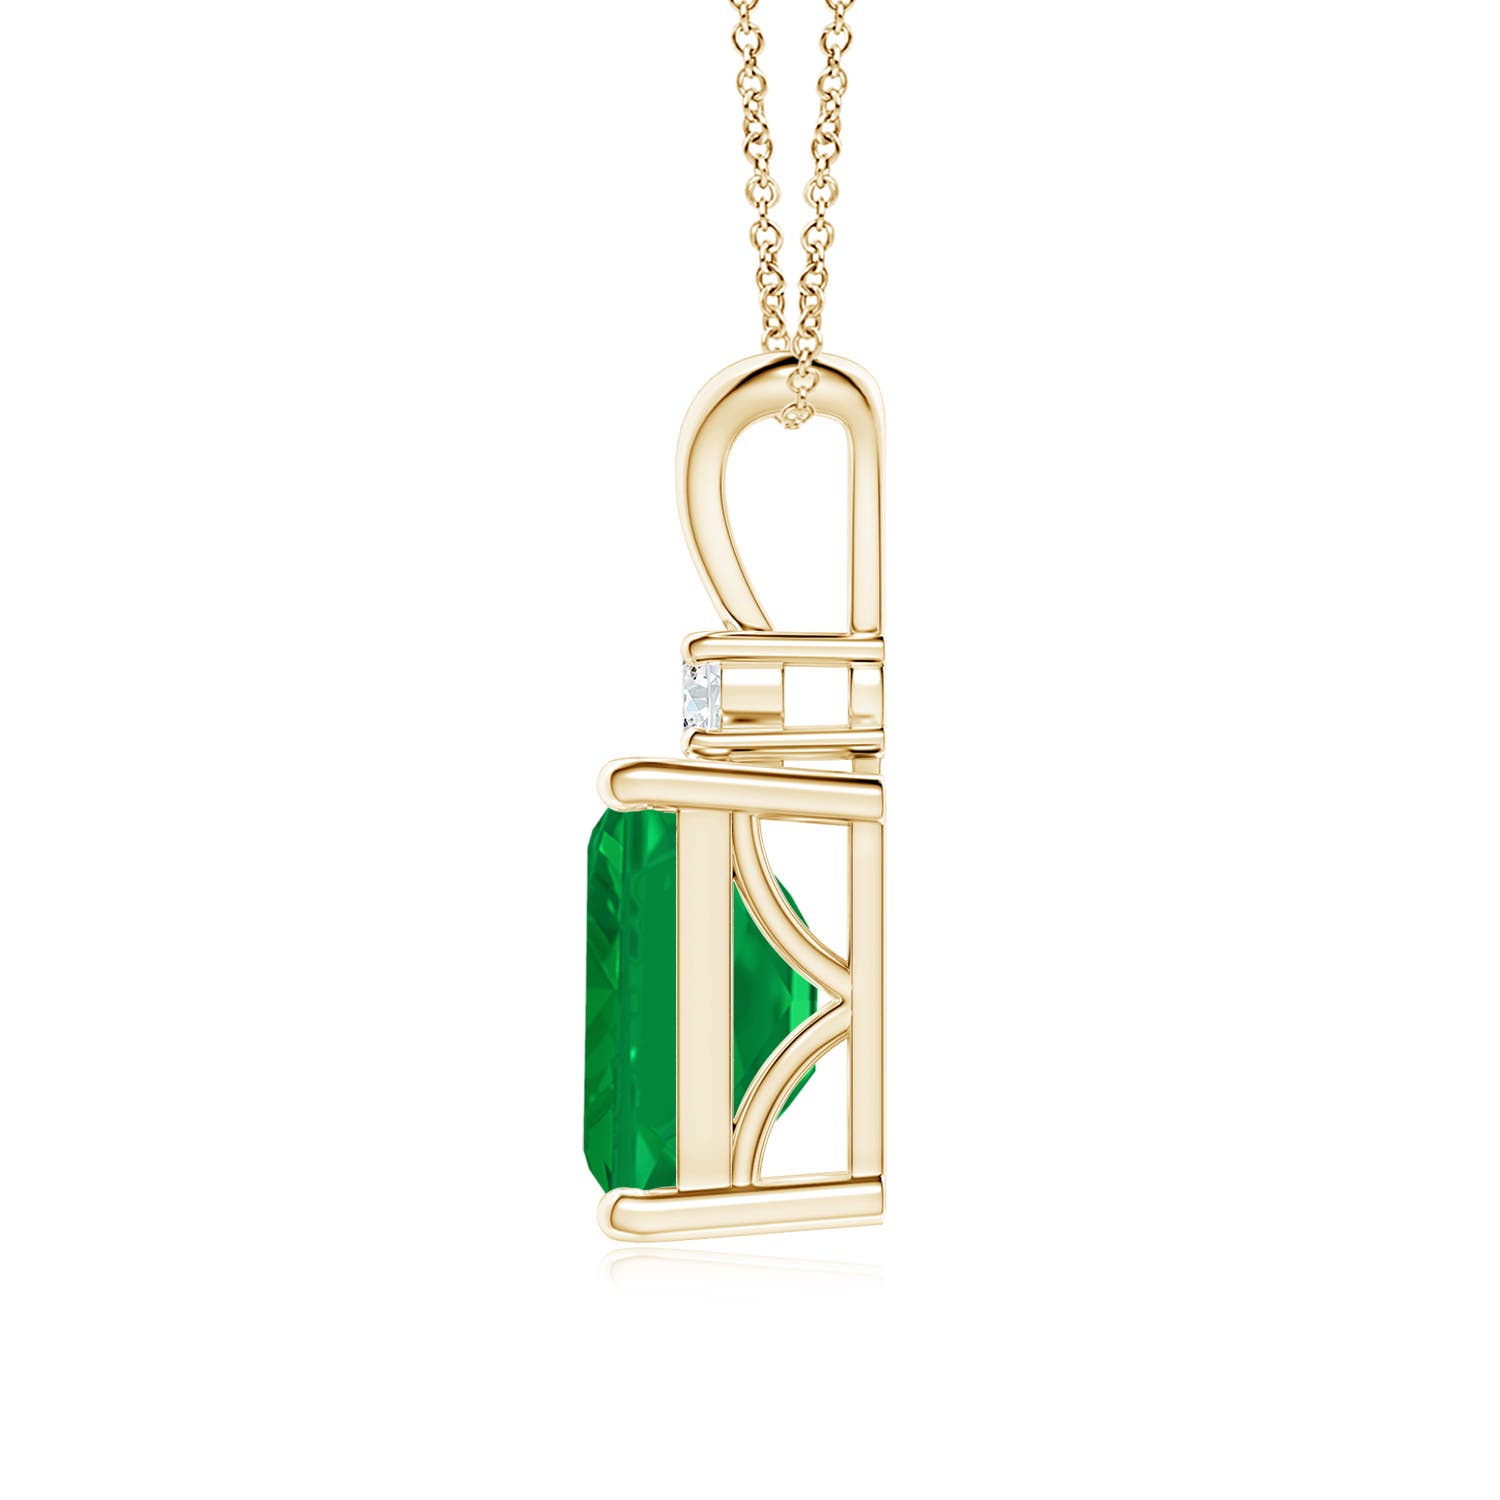 AA - Emerald / 2.32 CT / 14 KT Yellow Gold